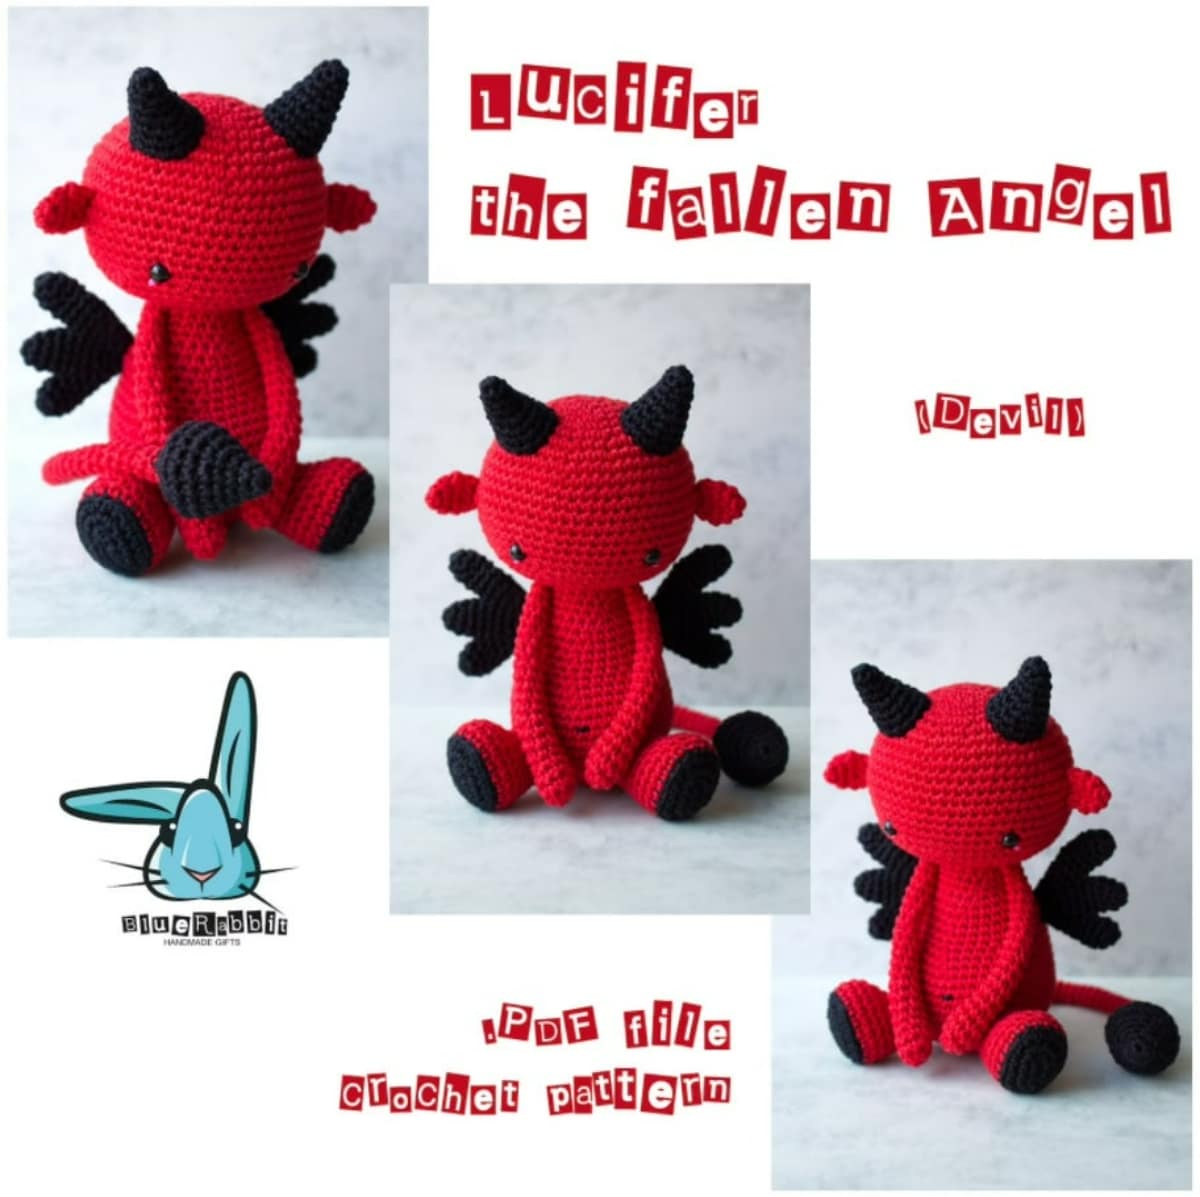 Small crochet stuffed red devil with black wings, horns, and feet sitting on a white background.